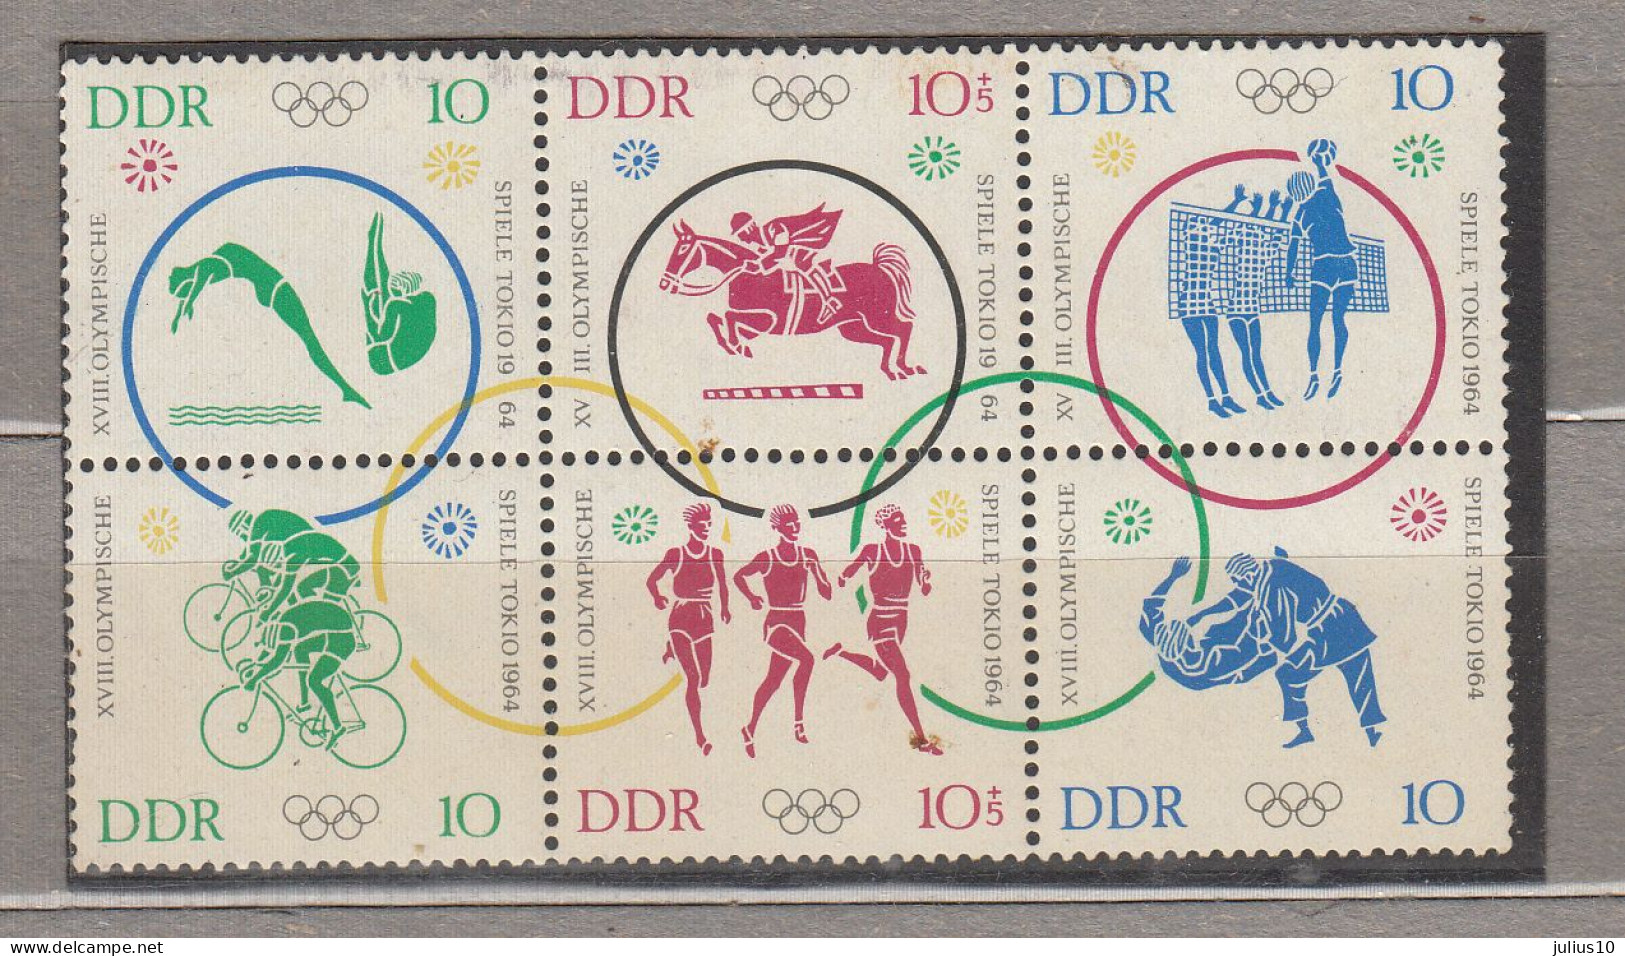 GERMANY DDR Olympic Games 1964 MNH (**) Michel 1039-1044 #Sp190 - Estate 1964: Tokio